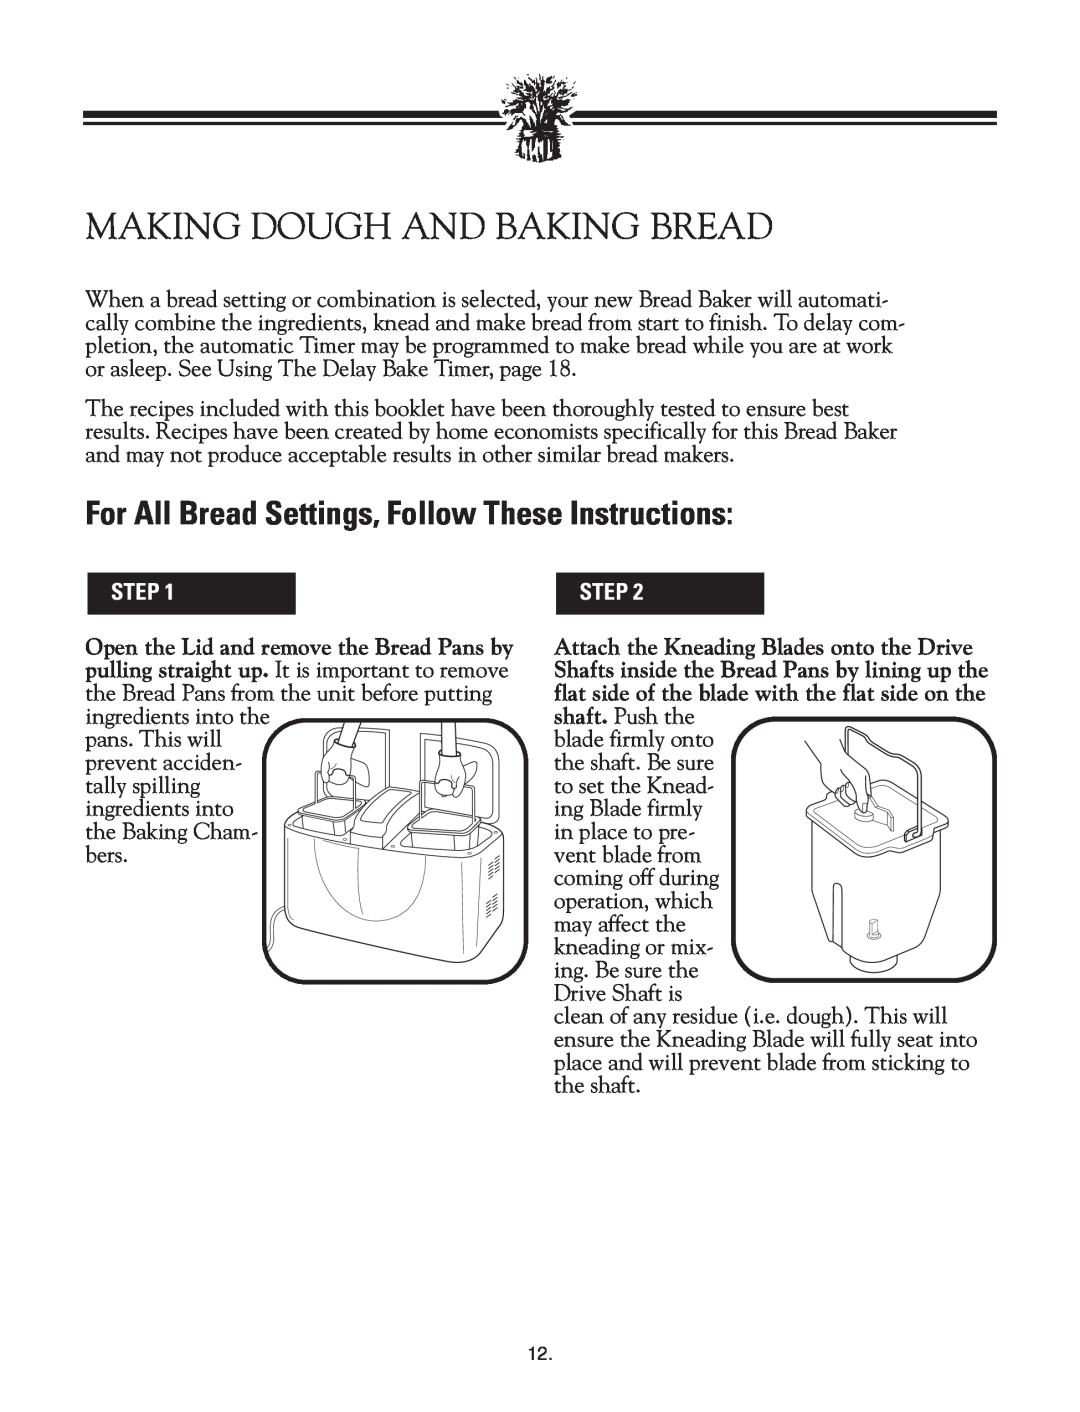 Breadman TR2828G instruction manual Making Dough And Baking Bread, For All Bread Settings, Follow These Instructions, Step 